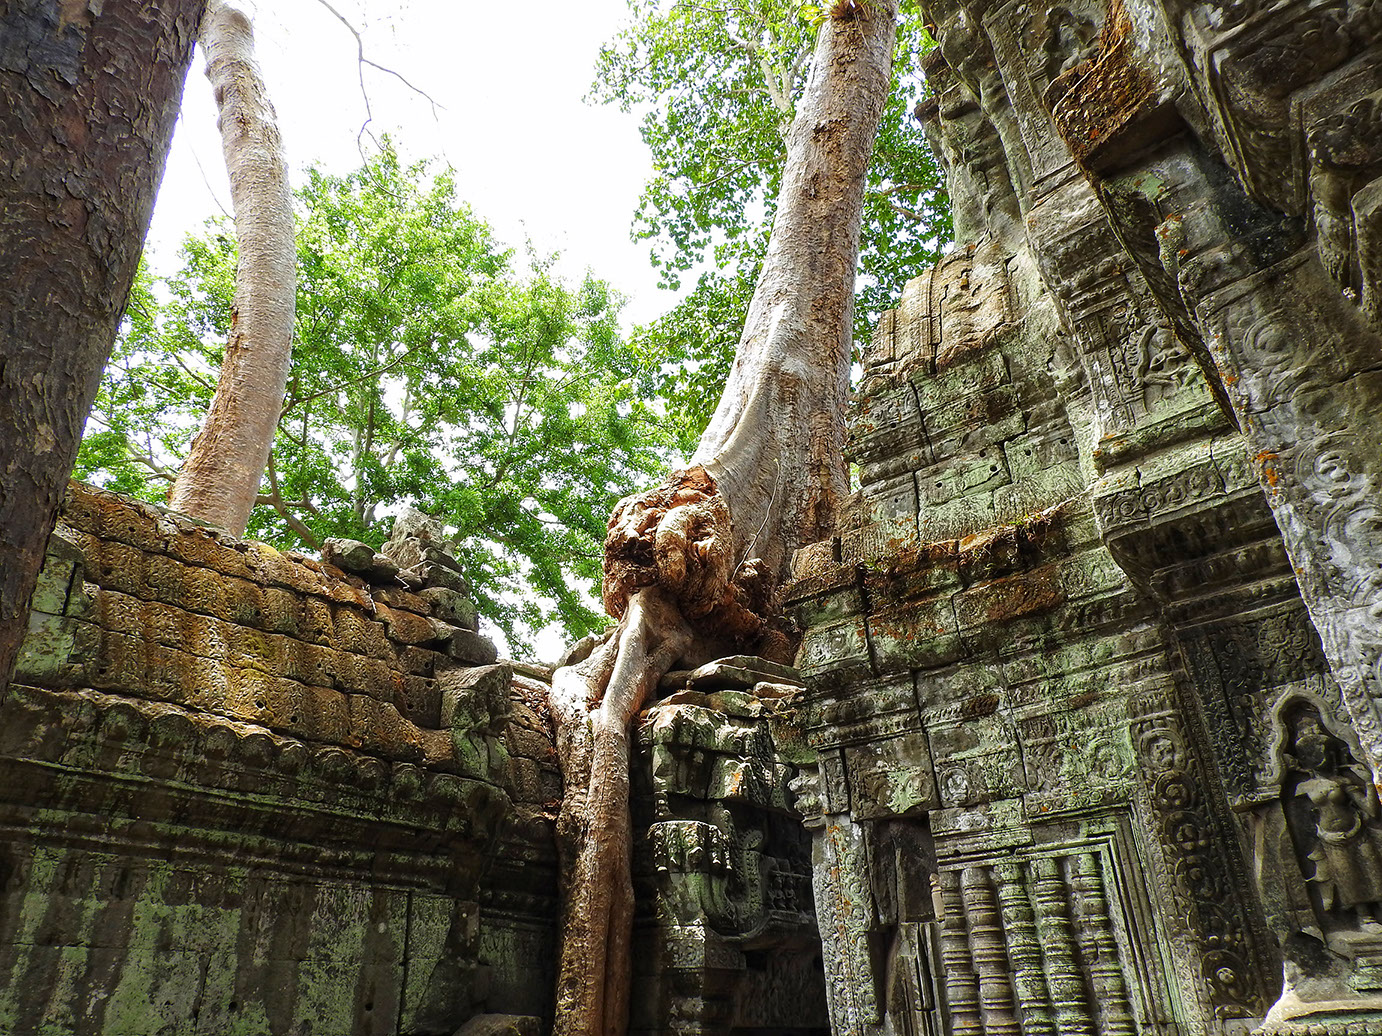 Intricate bas-relief depictions in Ta Prohm similar to Angkor Wat